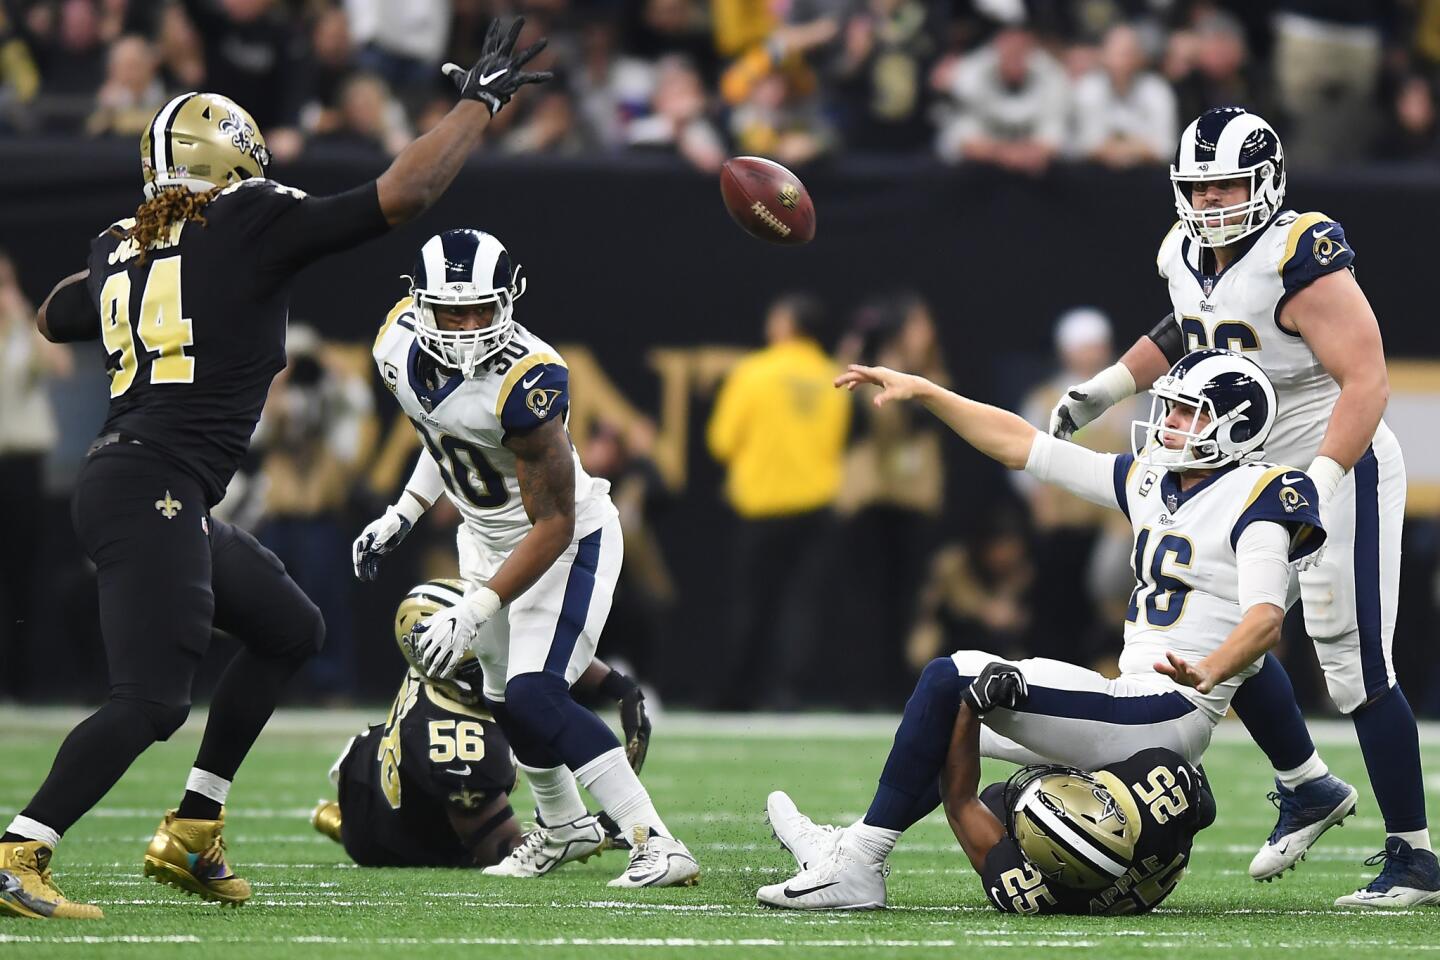 Rams quarterback Jared Goff makes a completion despite being tackled by New Orleans Saints' Eli Apple in the second quarter in the NFC Championship at the Superdome in New Orleans Sunday.